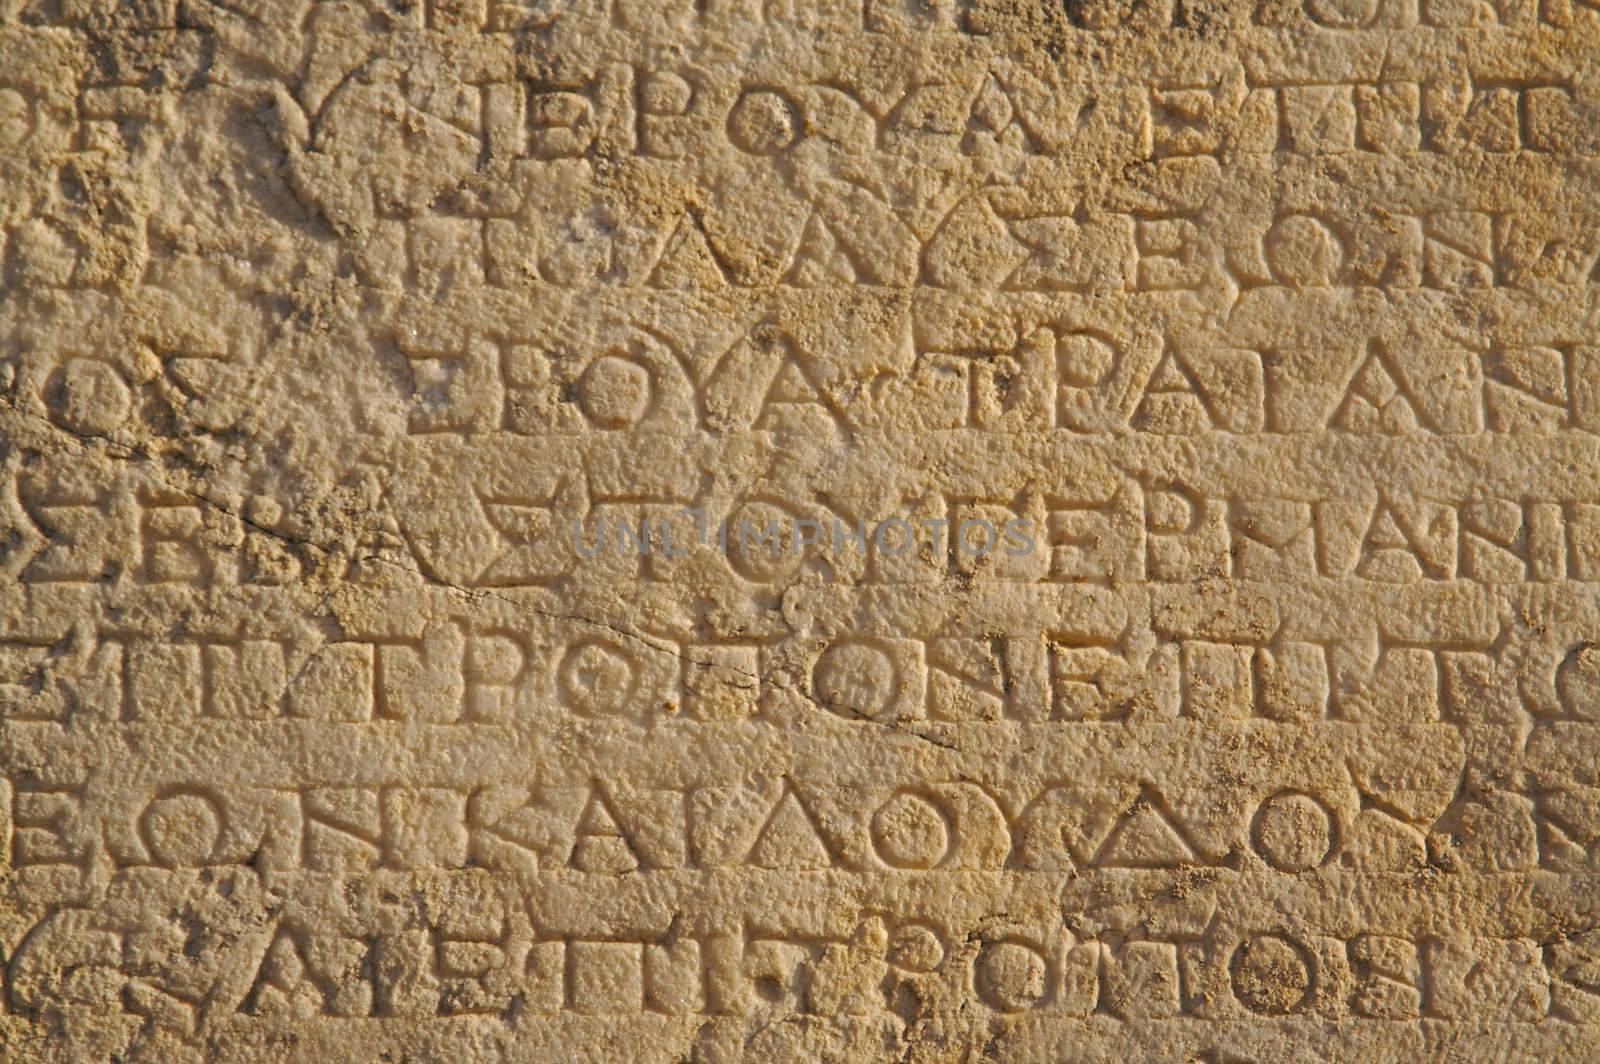 A close up of ancient Greek text from Ephesus, Turkey.